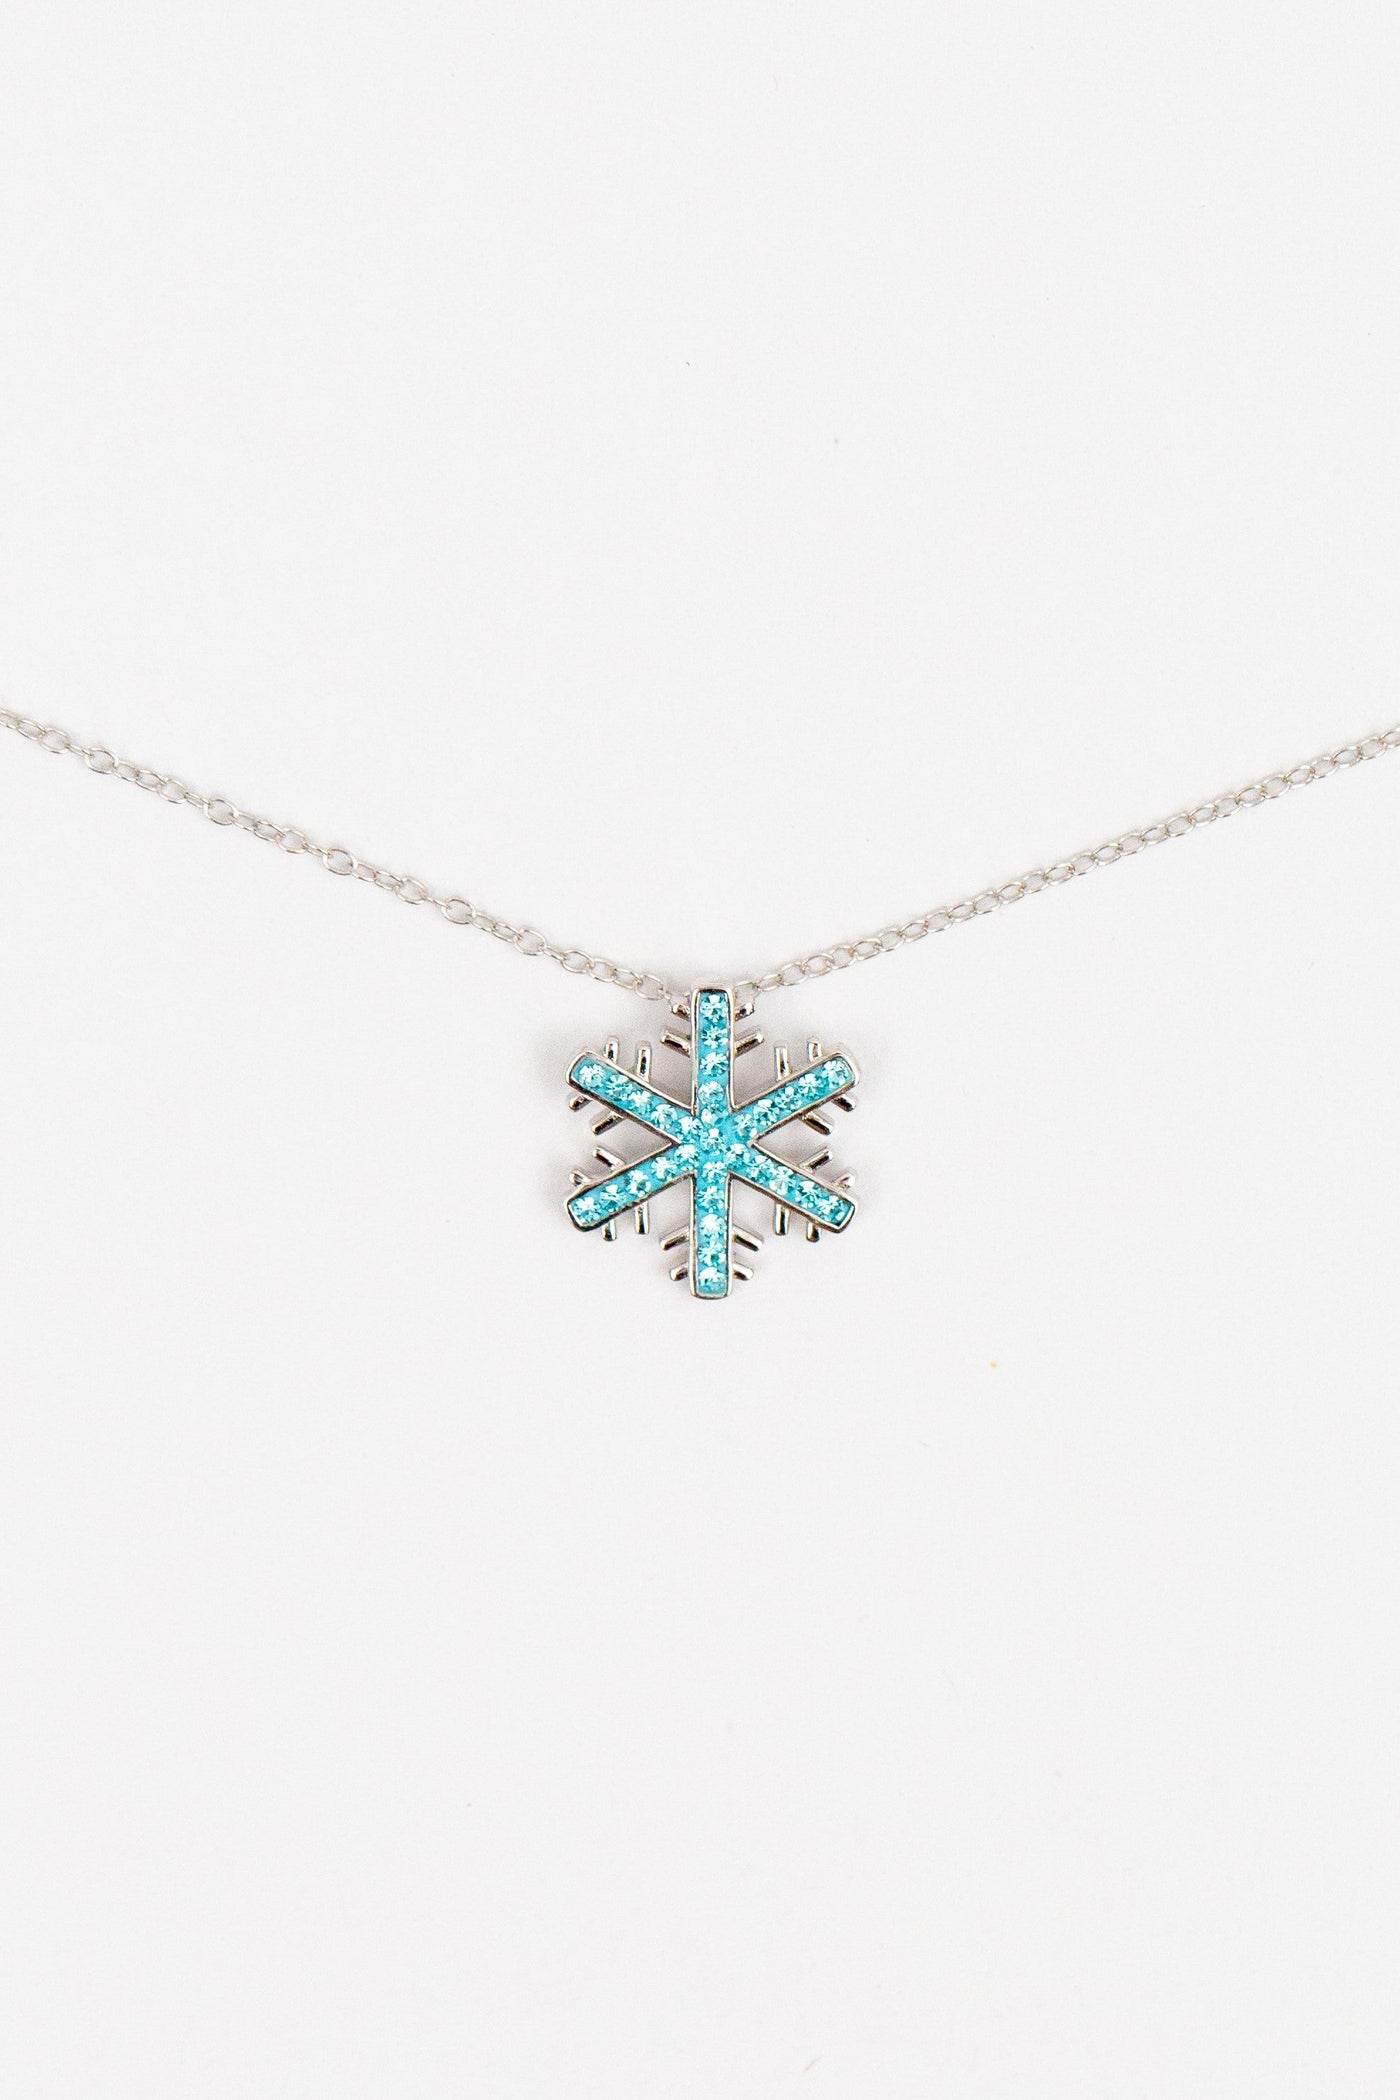 Snowflake (Sectored) Holiday Crystal Silver Pendant Necklace in Indicolite | Annie and Sisters